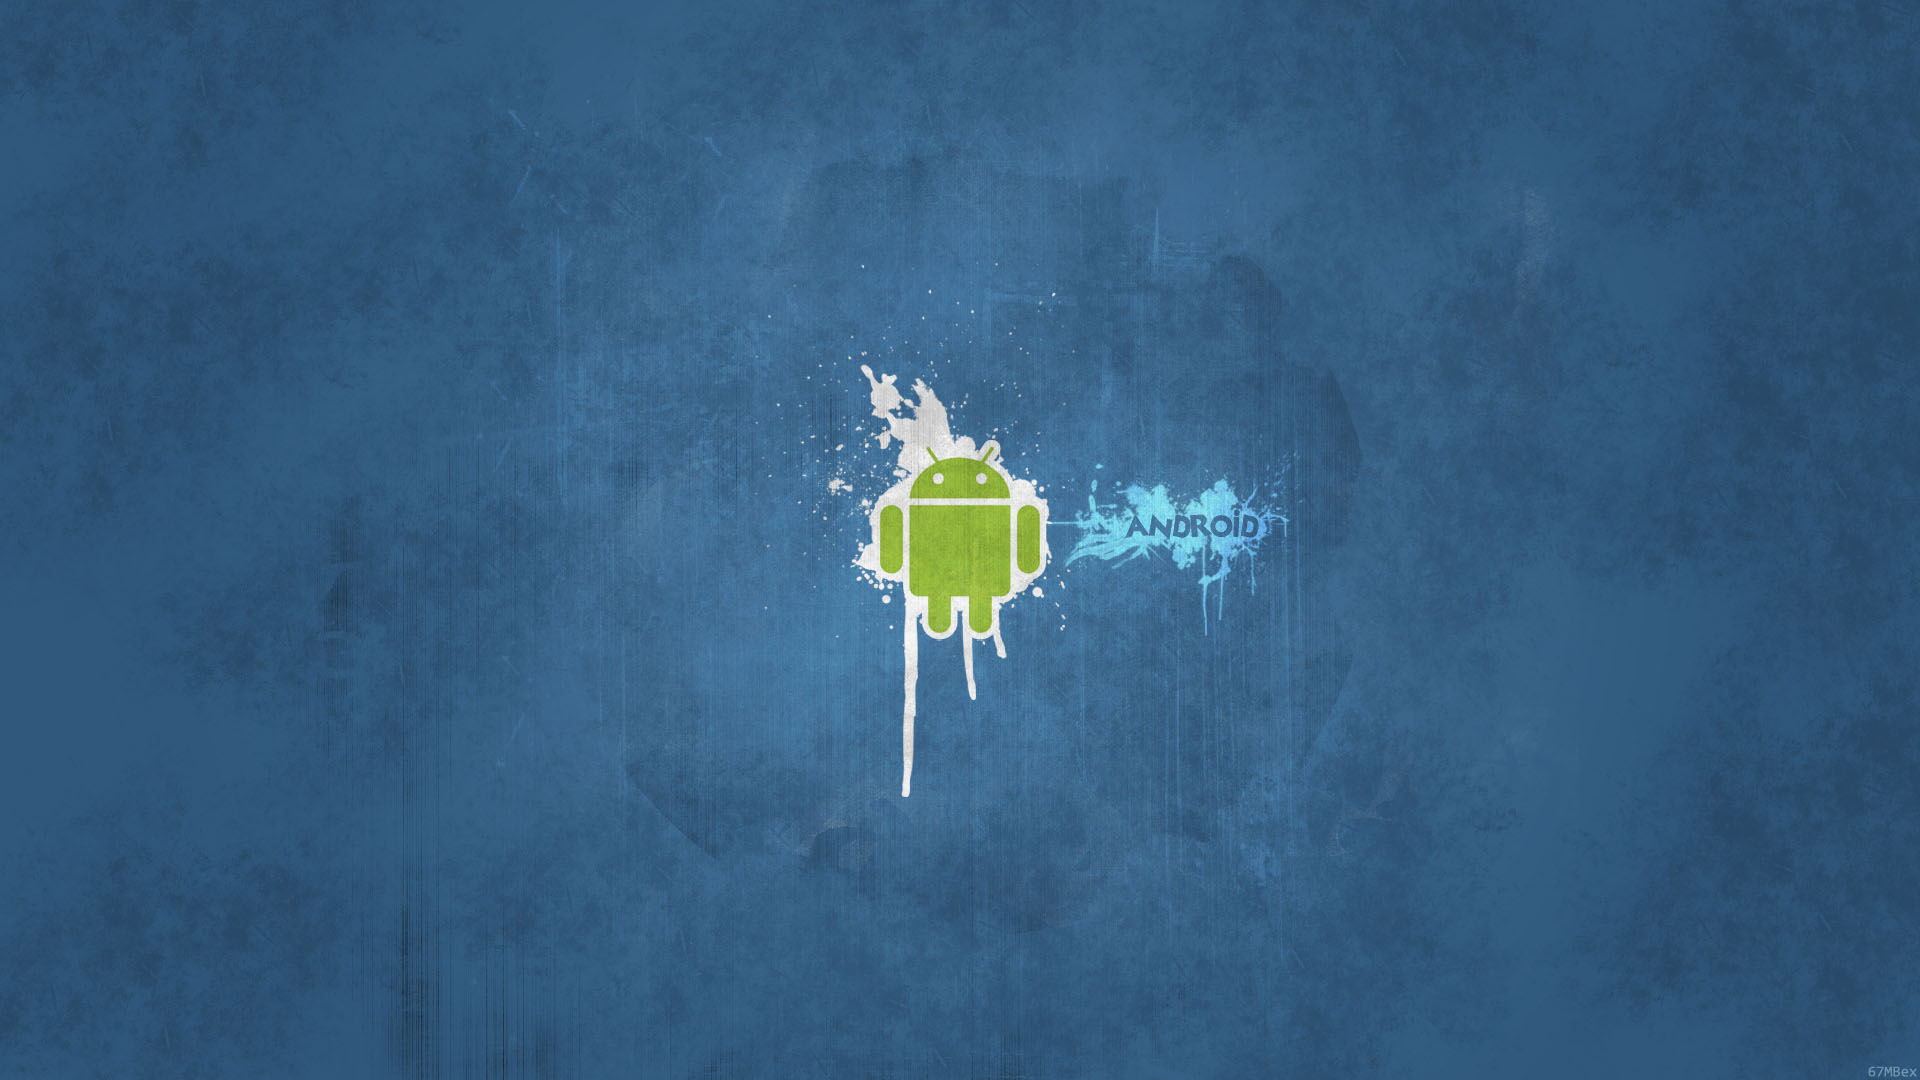 Wallpaper AndroidExperience Wallpaper Android android wallpaper by